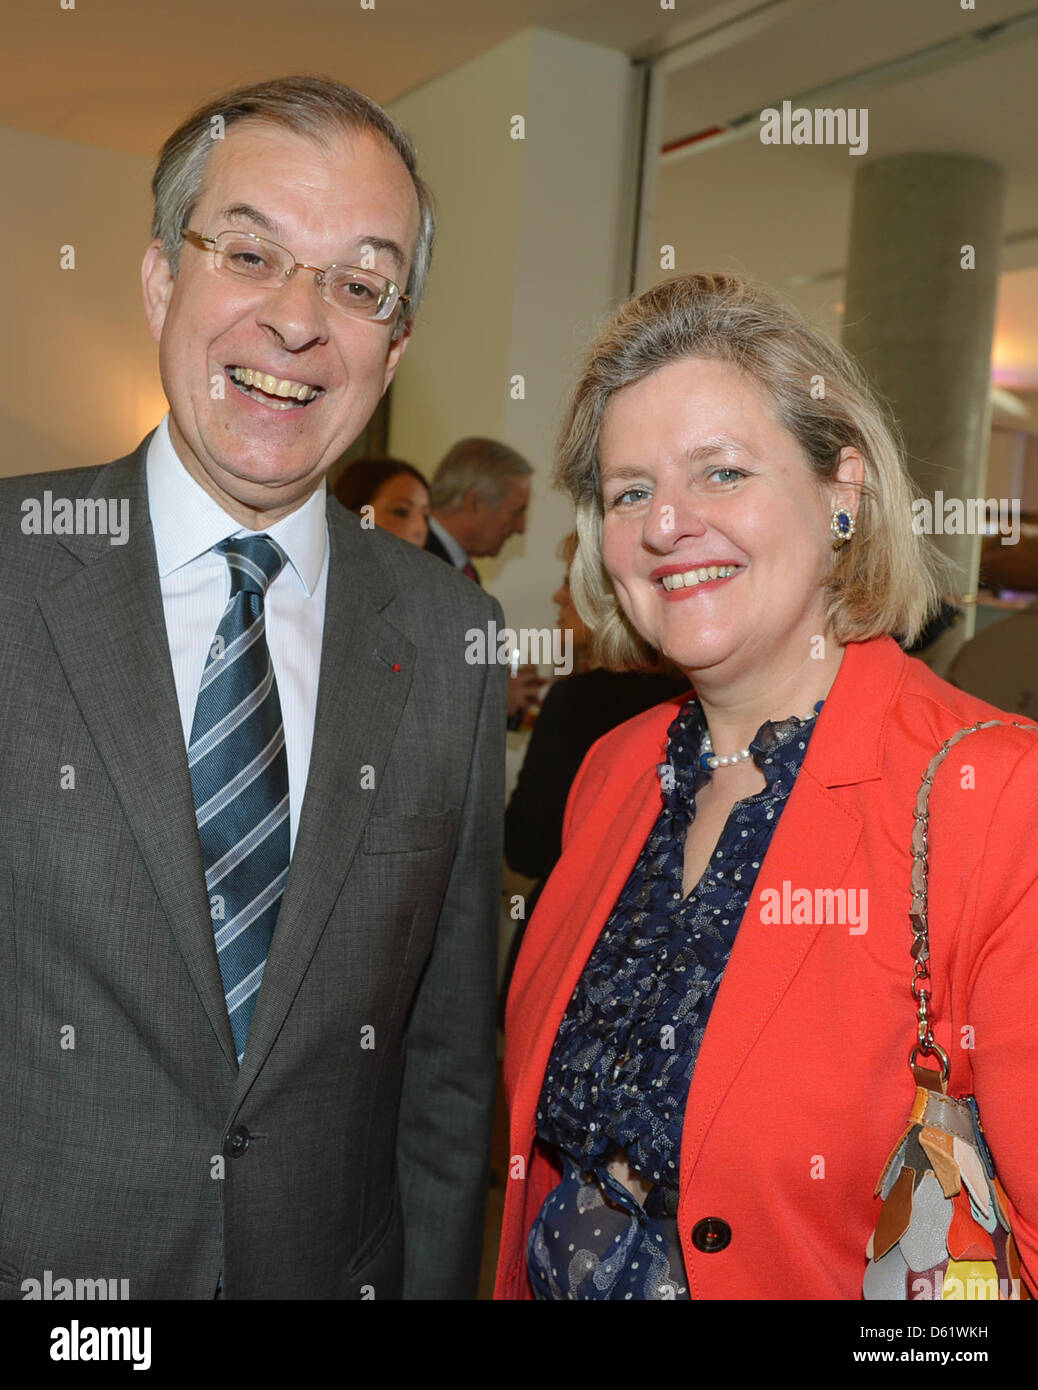 French ambassador Maurice Gourdault-Montagne and Countess Christiane of Rantzau talk at a cocktail lunch at the French embassy at the Brandenburg Gate in Berlin, Germany, 03 May 2012. The reception took place on the occasion of the Parisien arts and antiques fair 'Biennale des Antiquaires'. Photo: Jens Kalaene Stock Photo